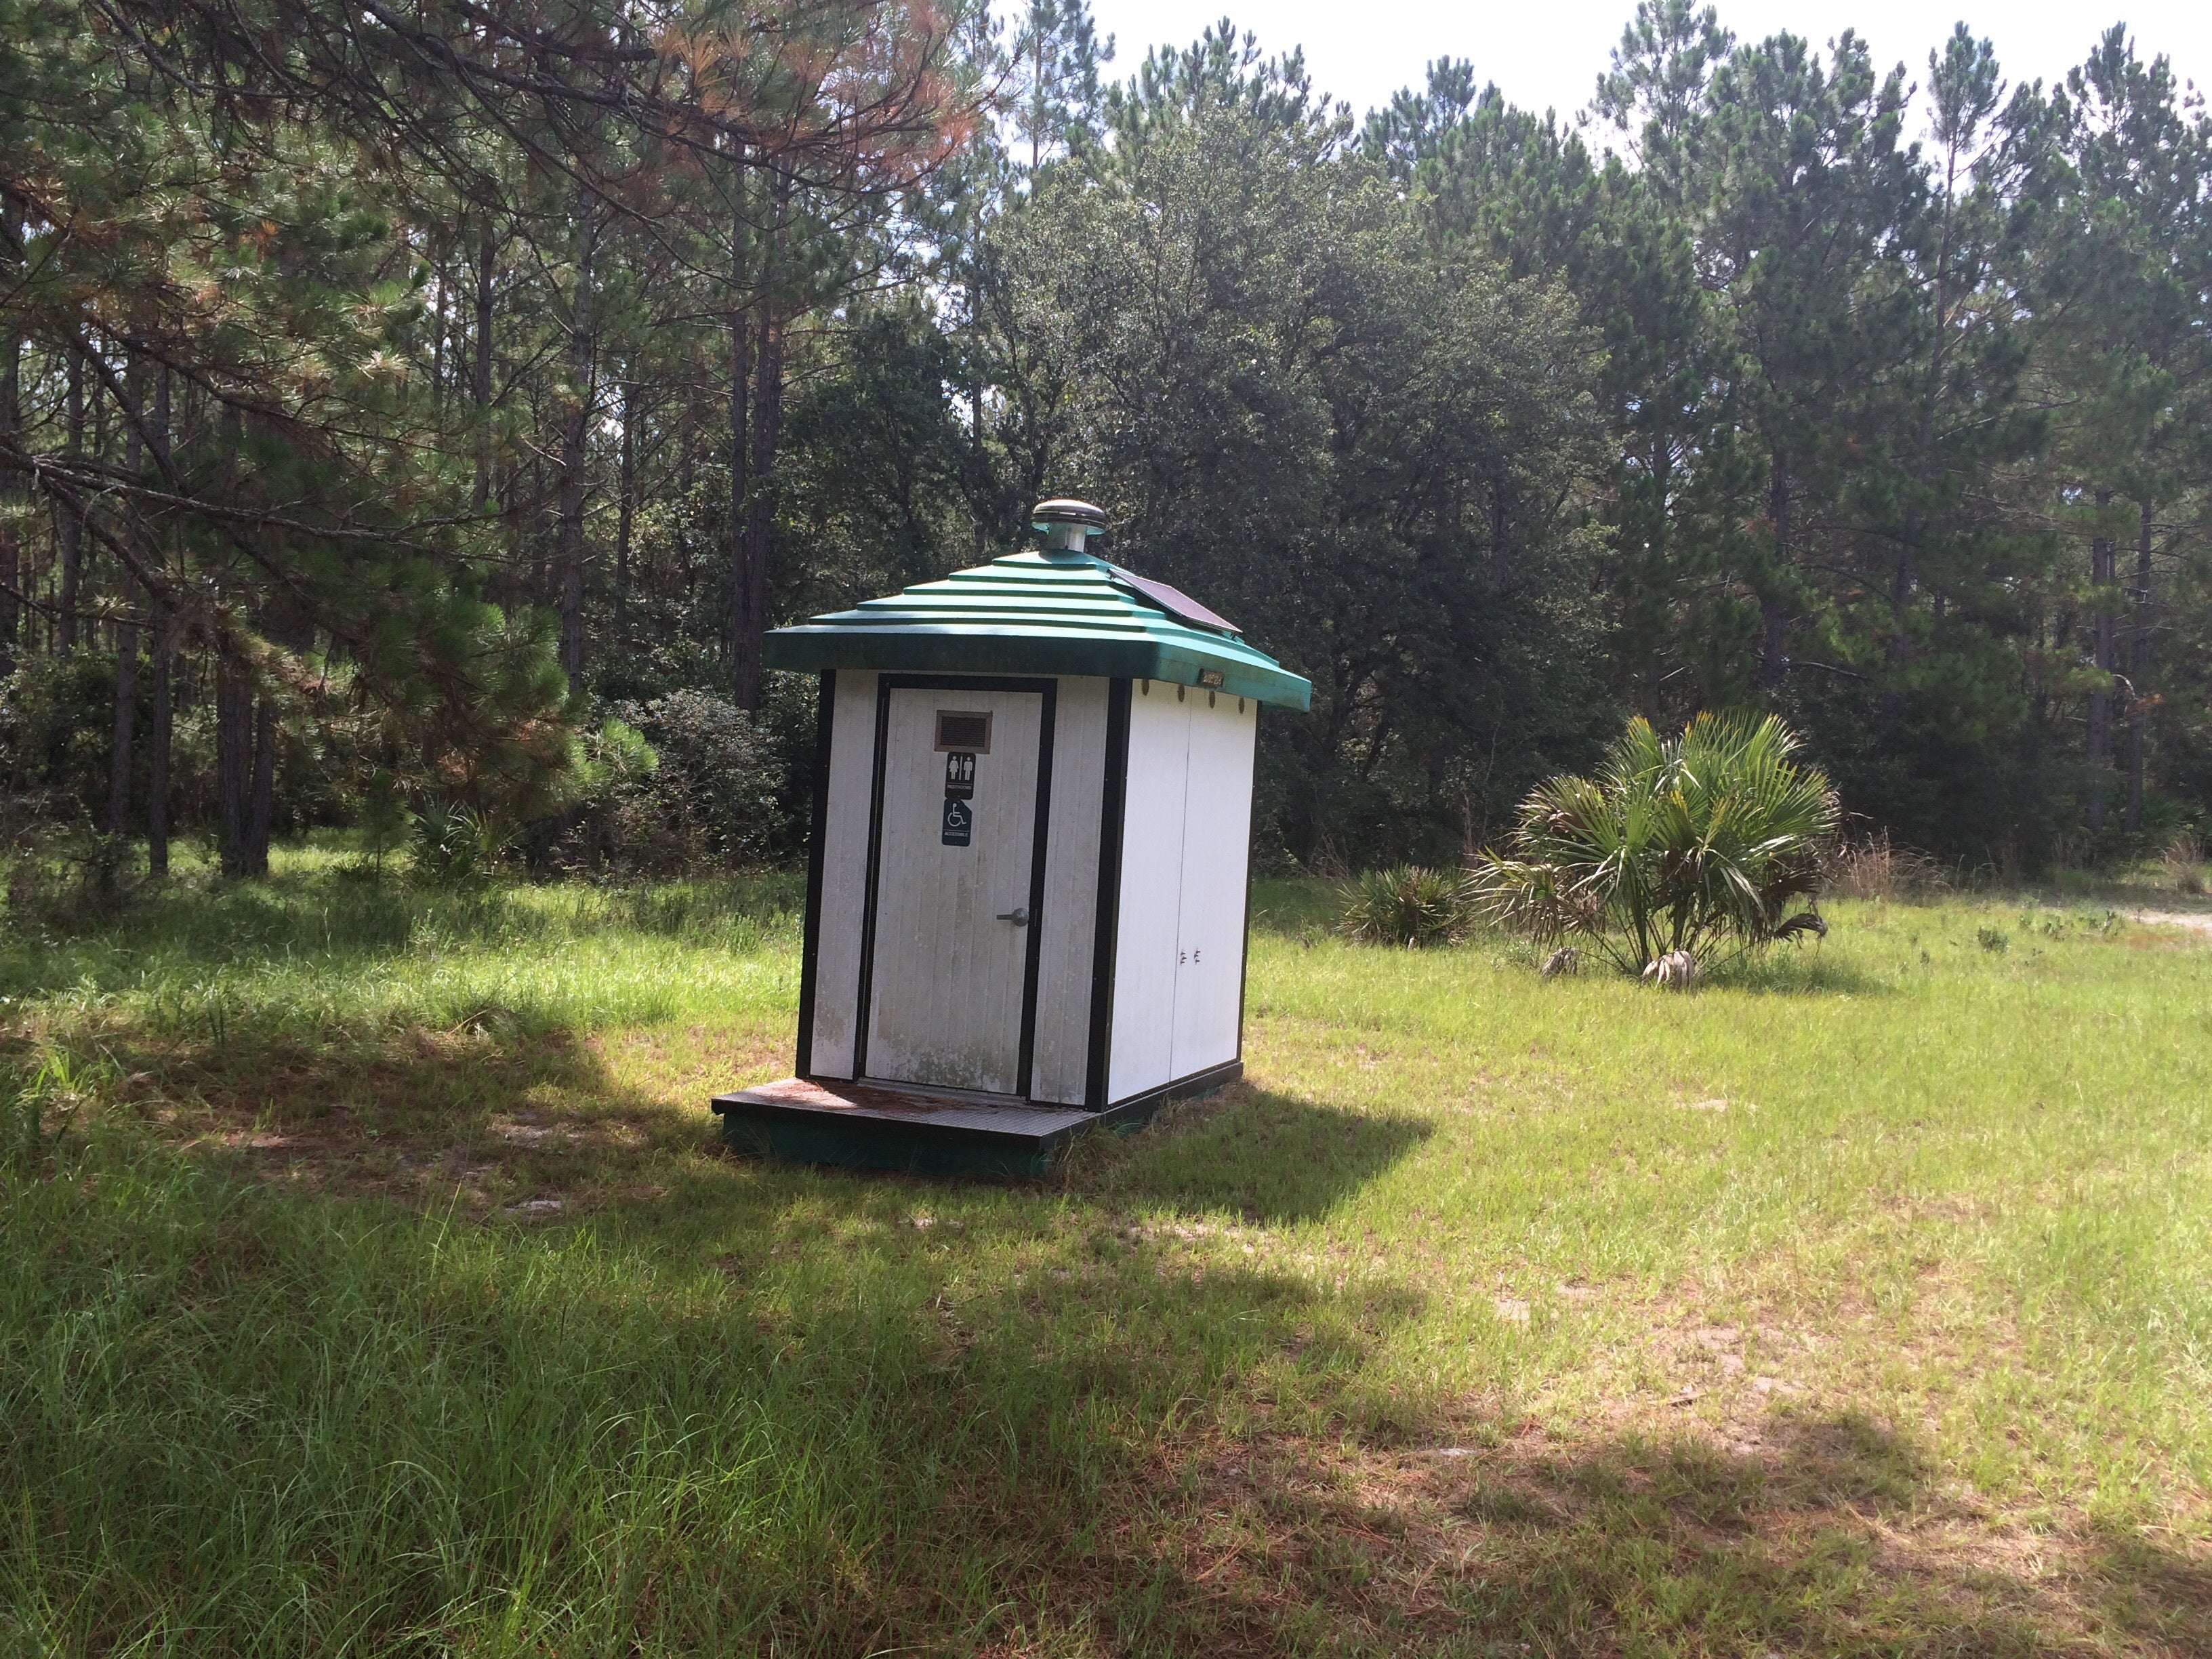 Camper submitted image from Seminole State Forest - Oaks Camp - 4